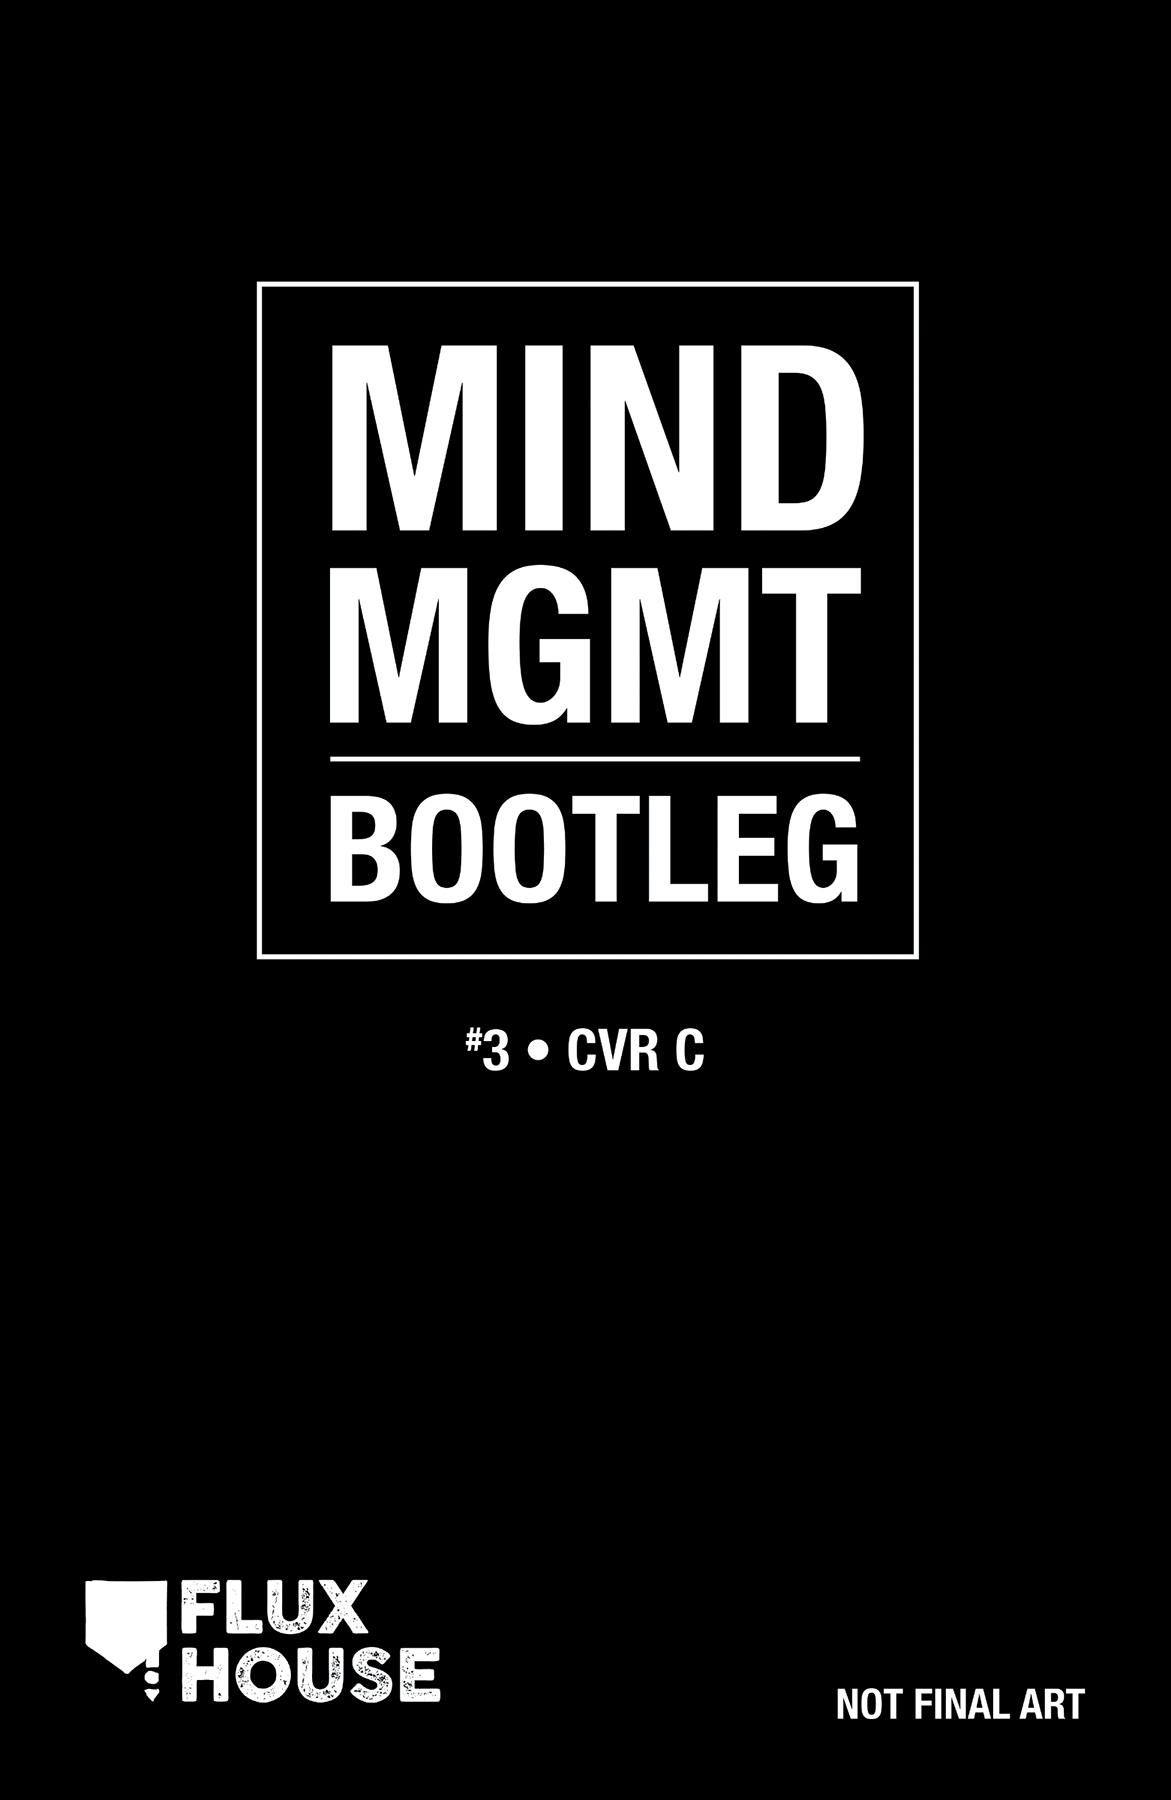 Mind Mgmt Bootleg #3 Cover C Perez (Of 4)